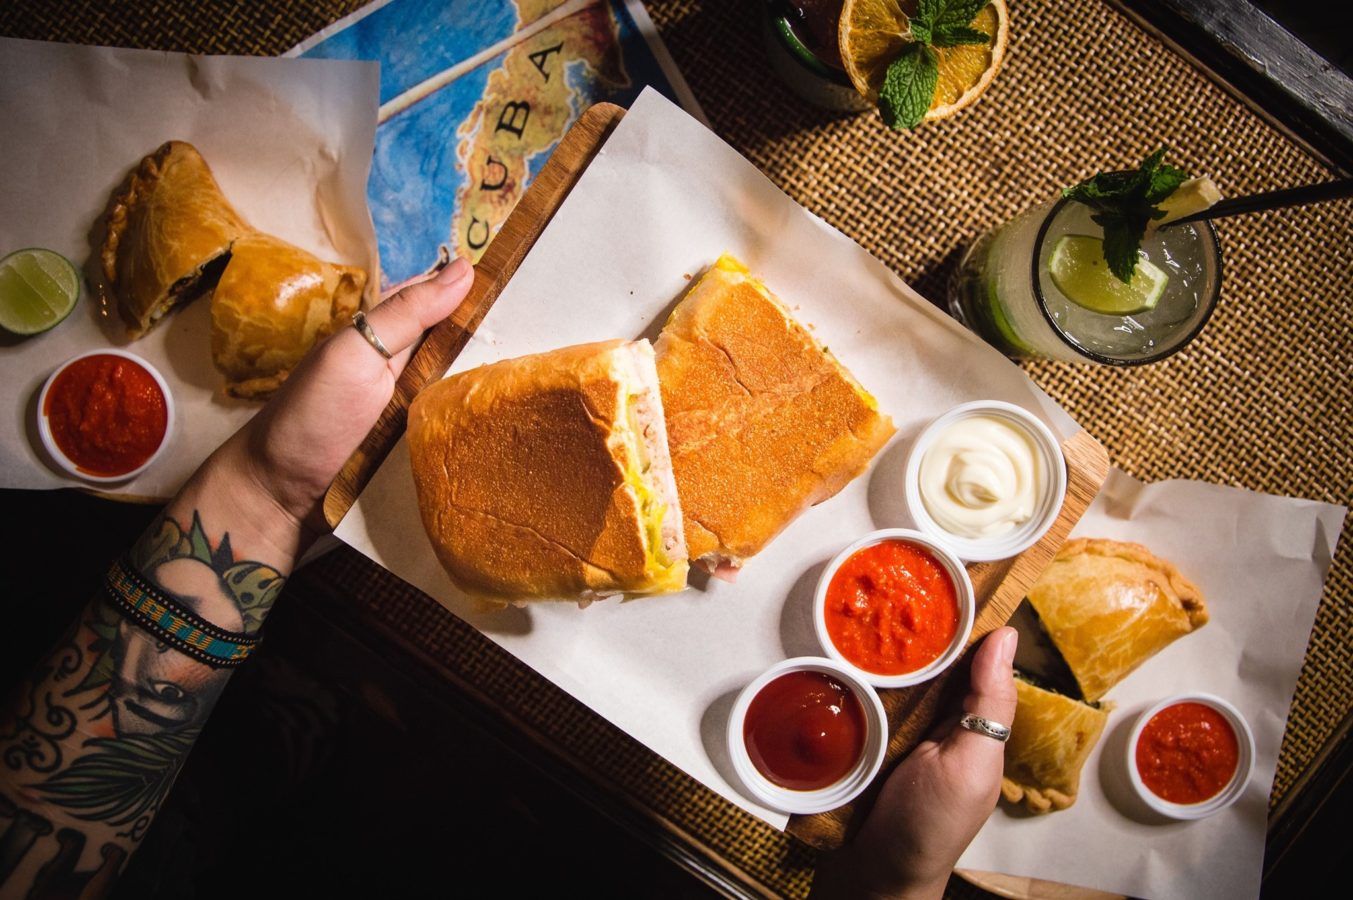 Where to find the best Cuban sandwiches in Bangkok